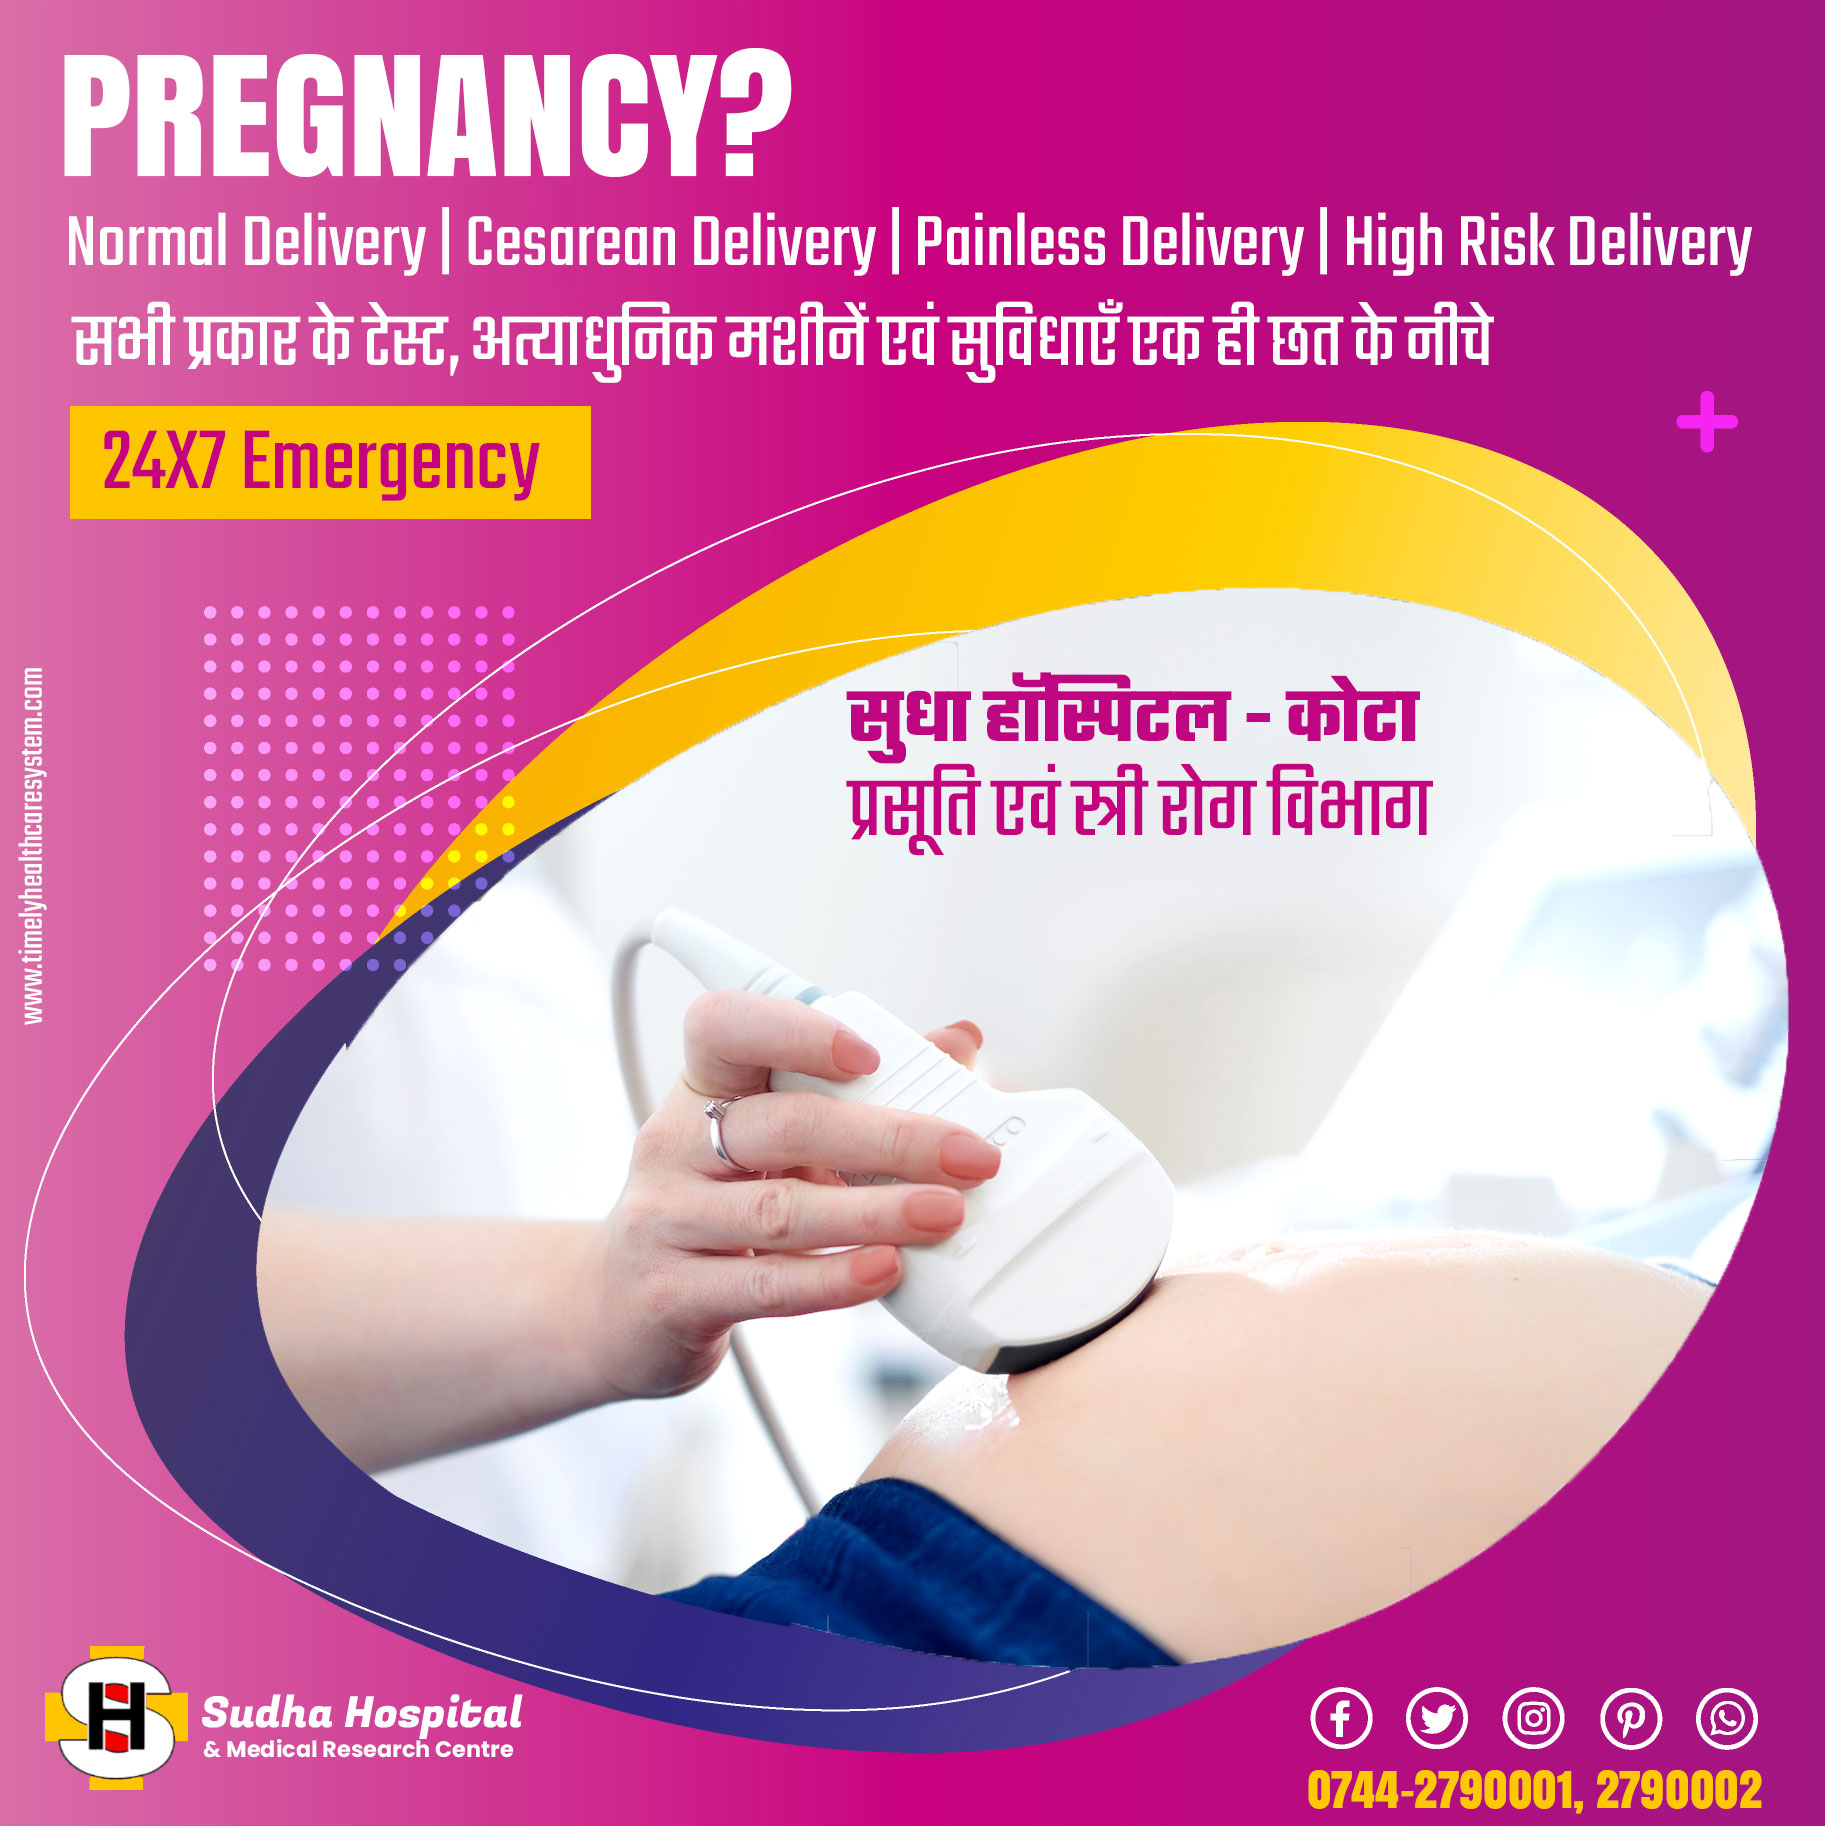 Normal Delivery | Female Ultrasound | Sudha Hospital & Medical research Centre